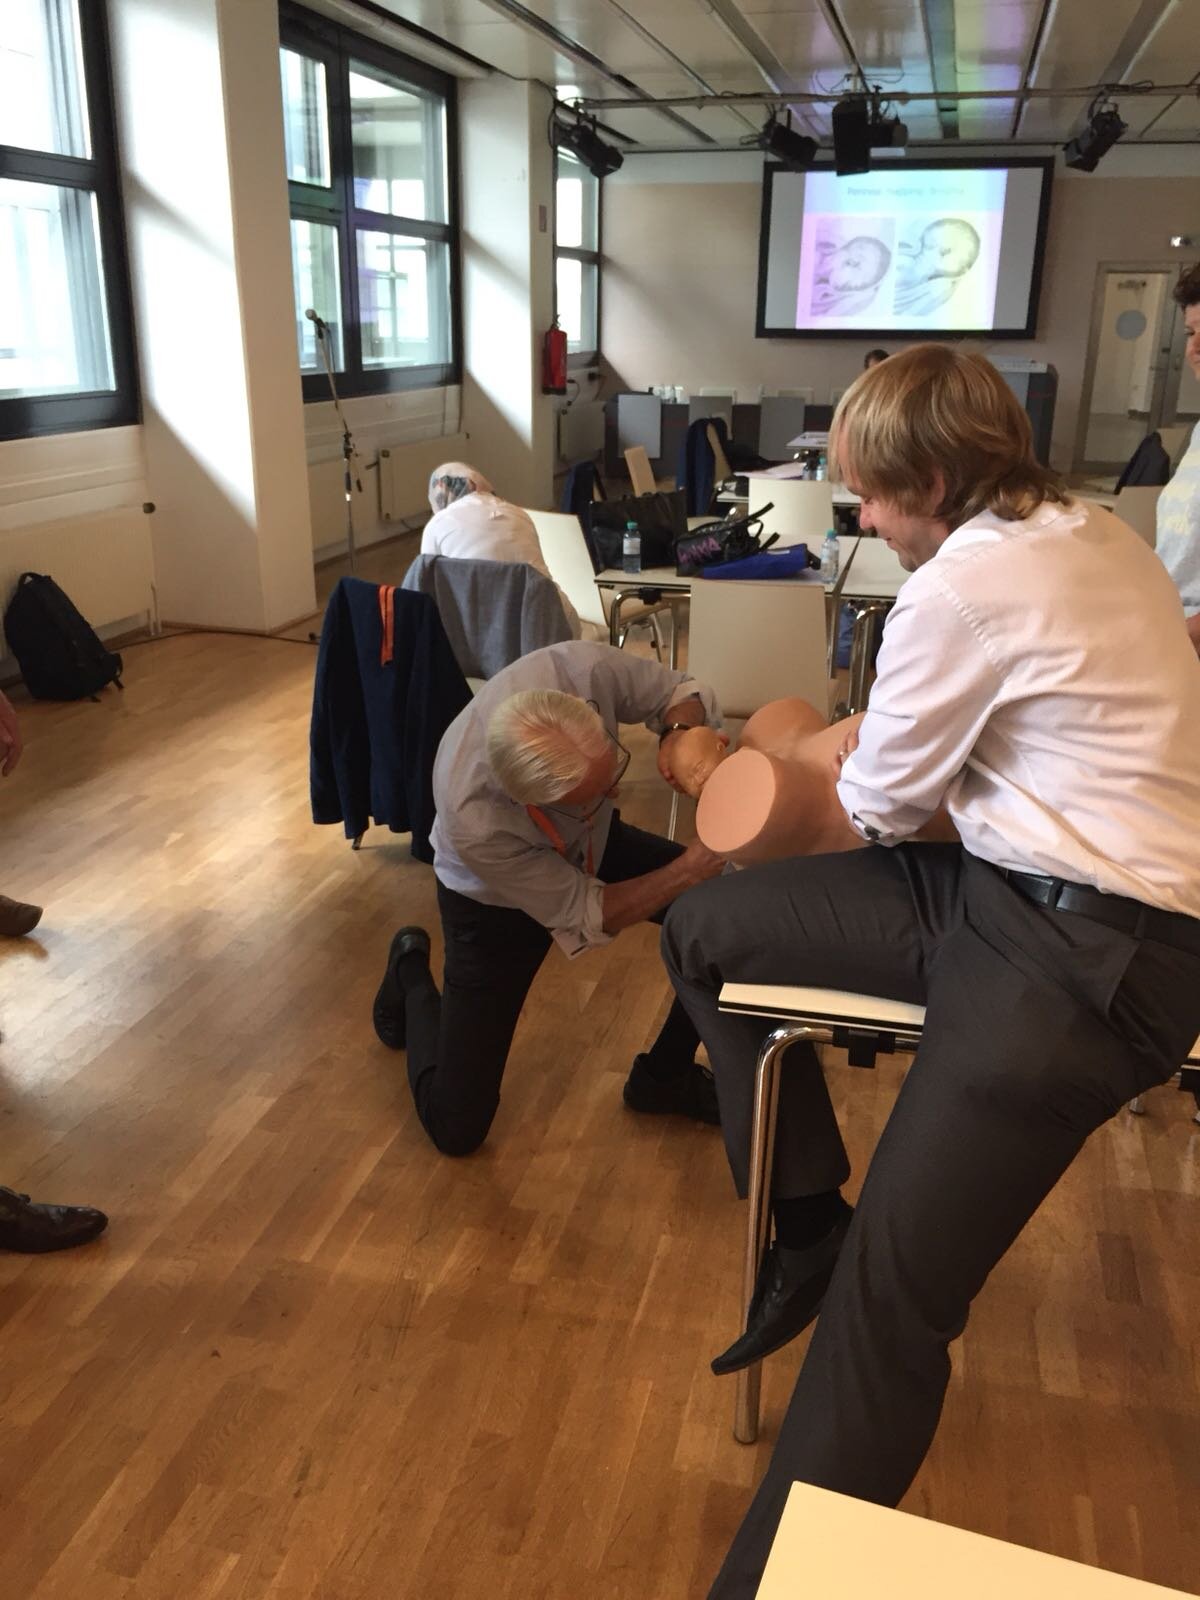 2018 - PEERS workshop in Vienna, doc. Rušavý supervises the technique of protecting perineum during childbirth